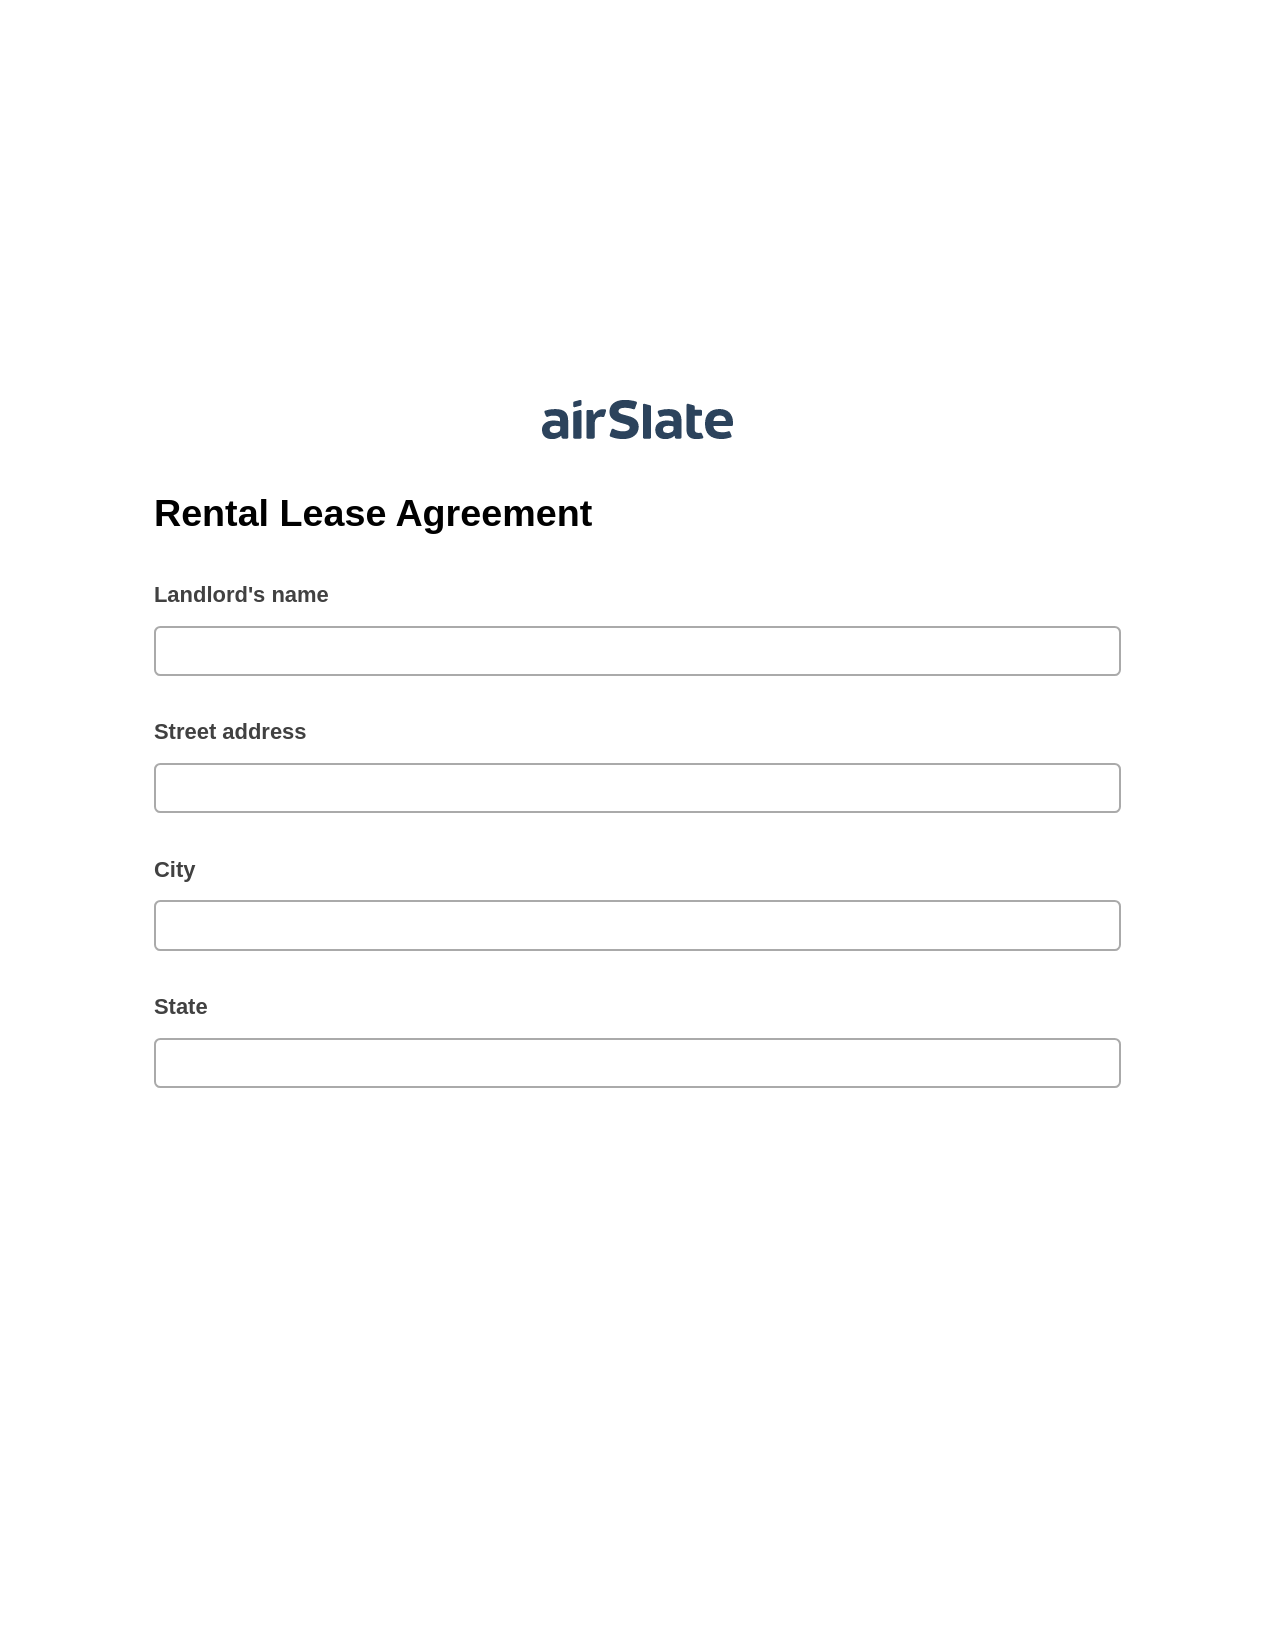 Rental Lease Agreement Pre-fill from CSV File Dropdown Options Bot, Create Slate every Google Sheet Update Bot, Box Bot